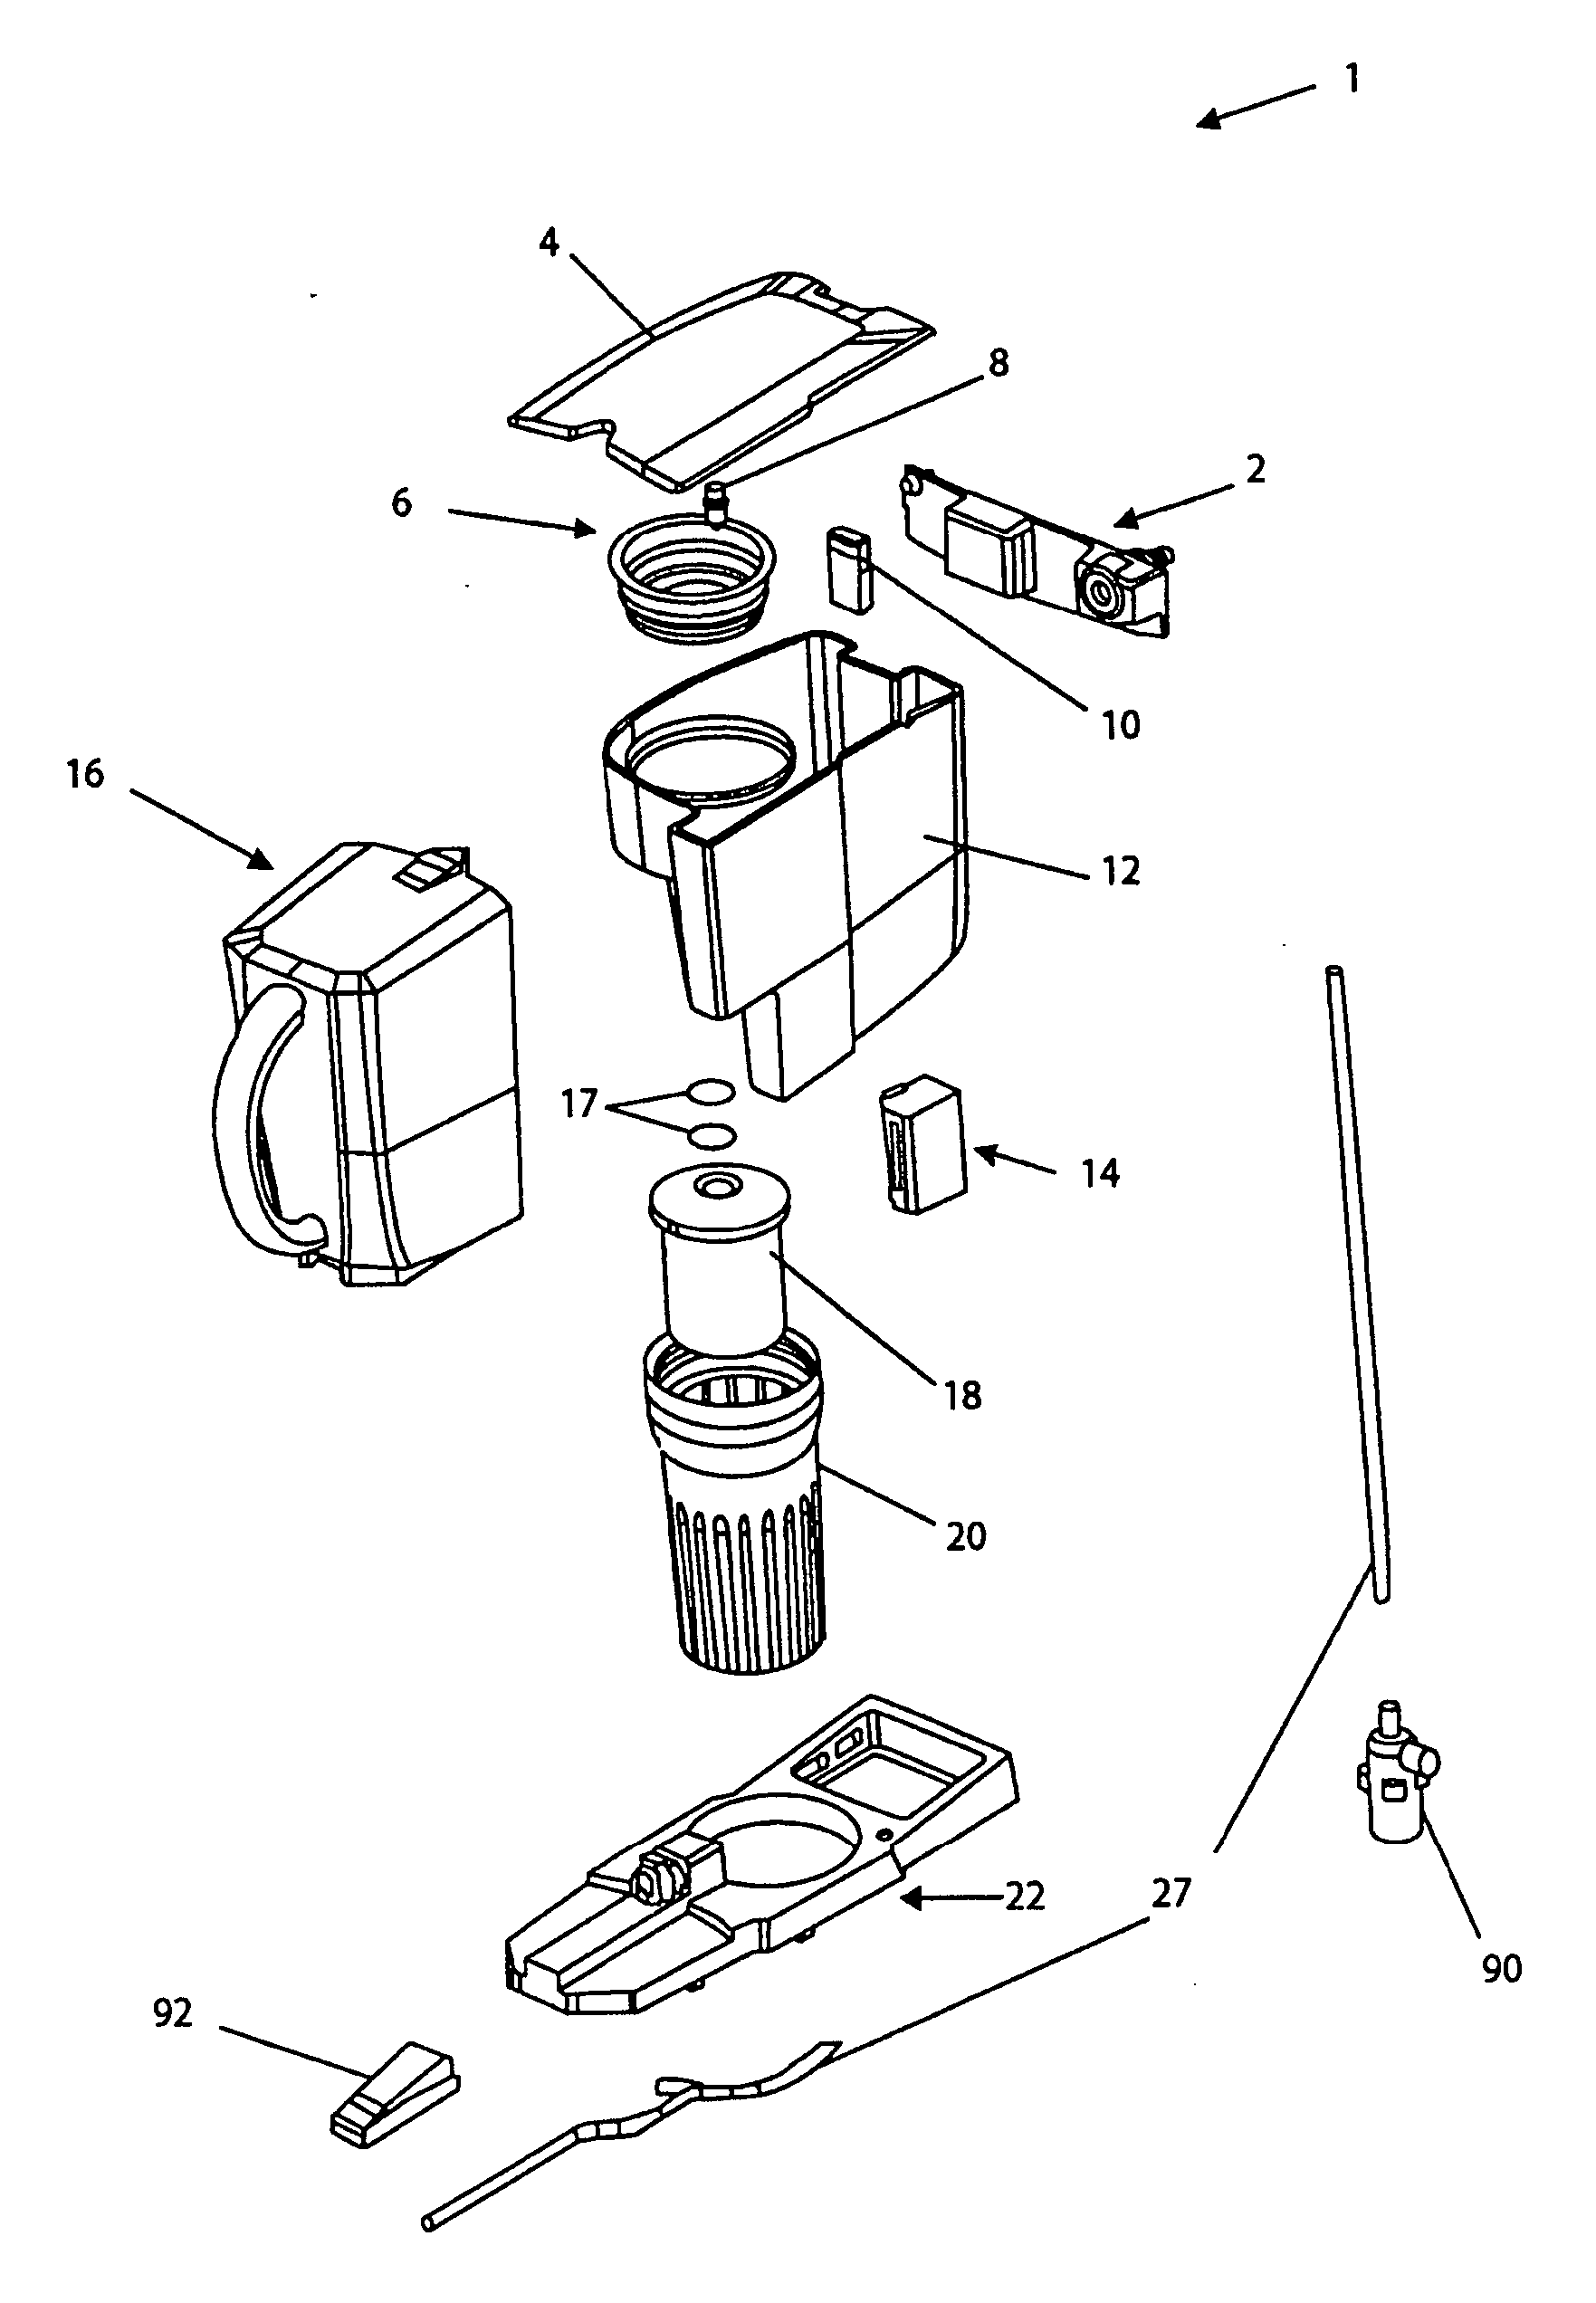 Water filter and dispenser system